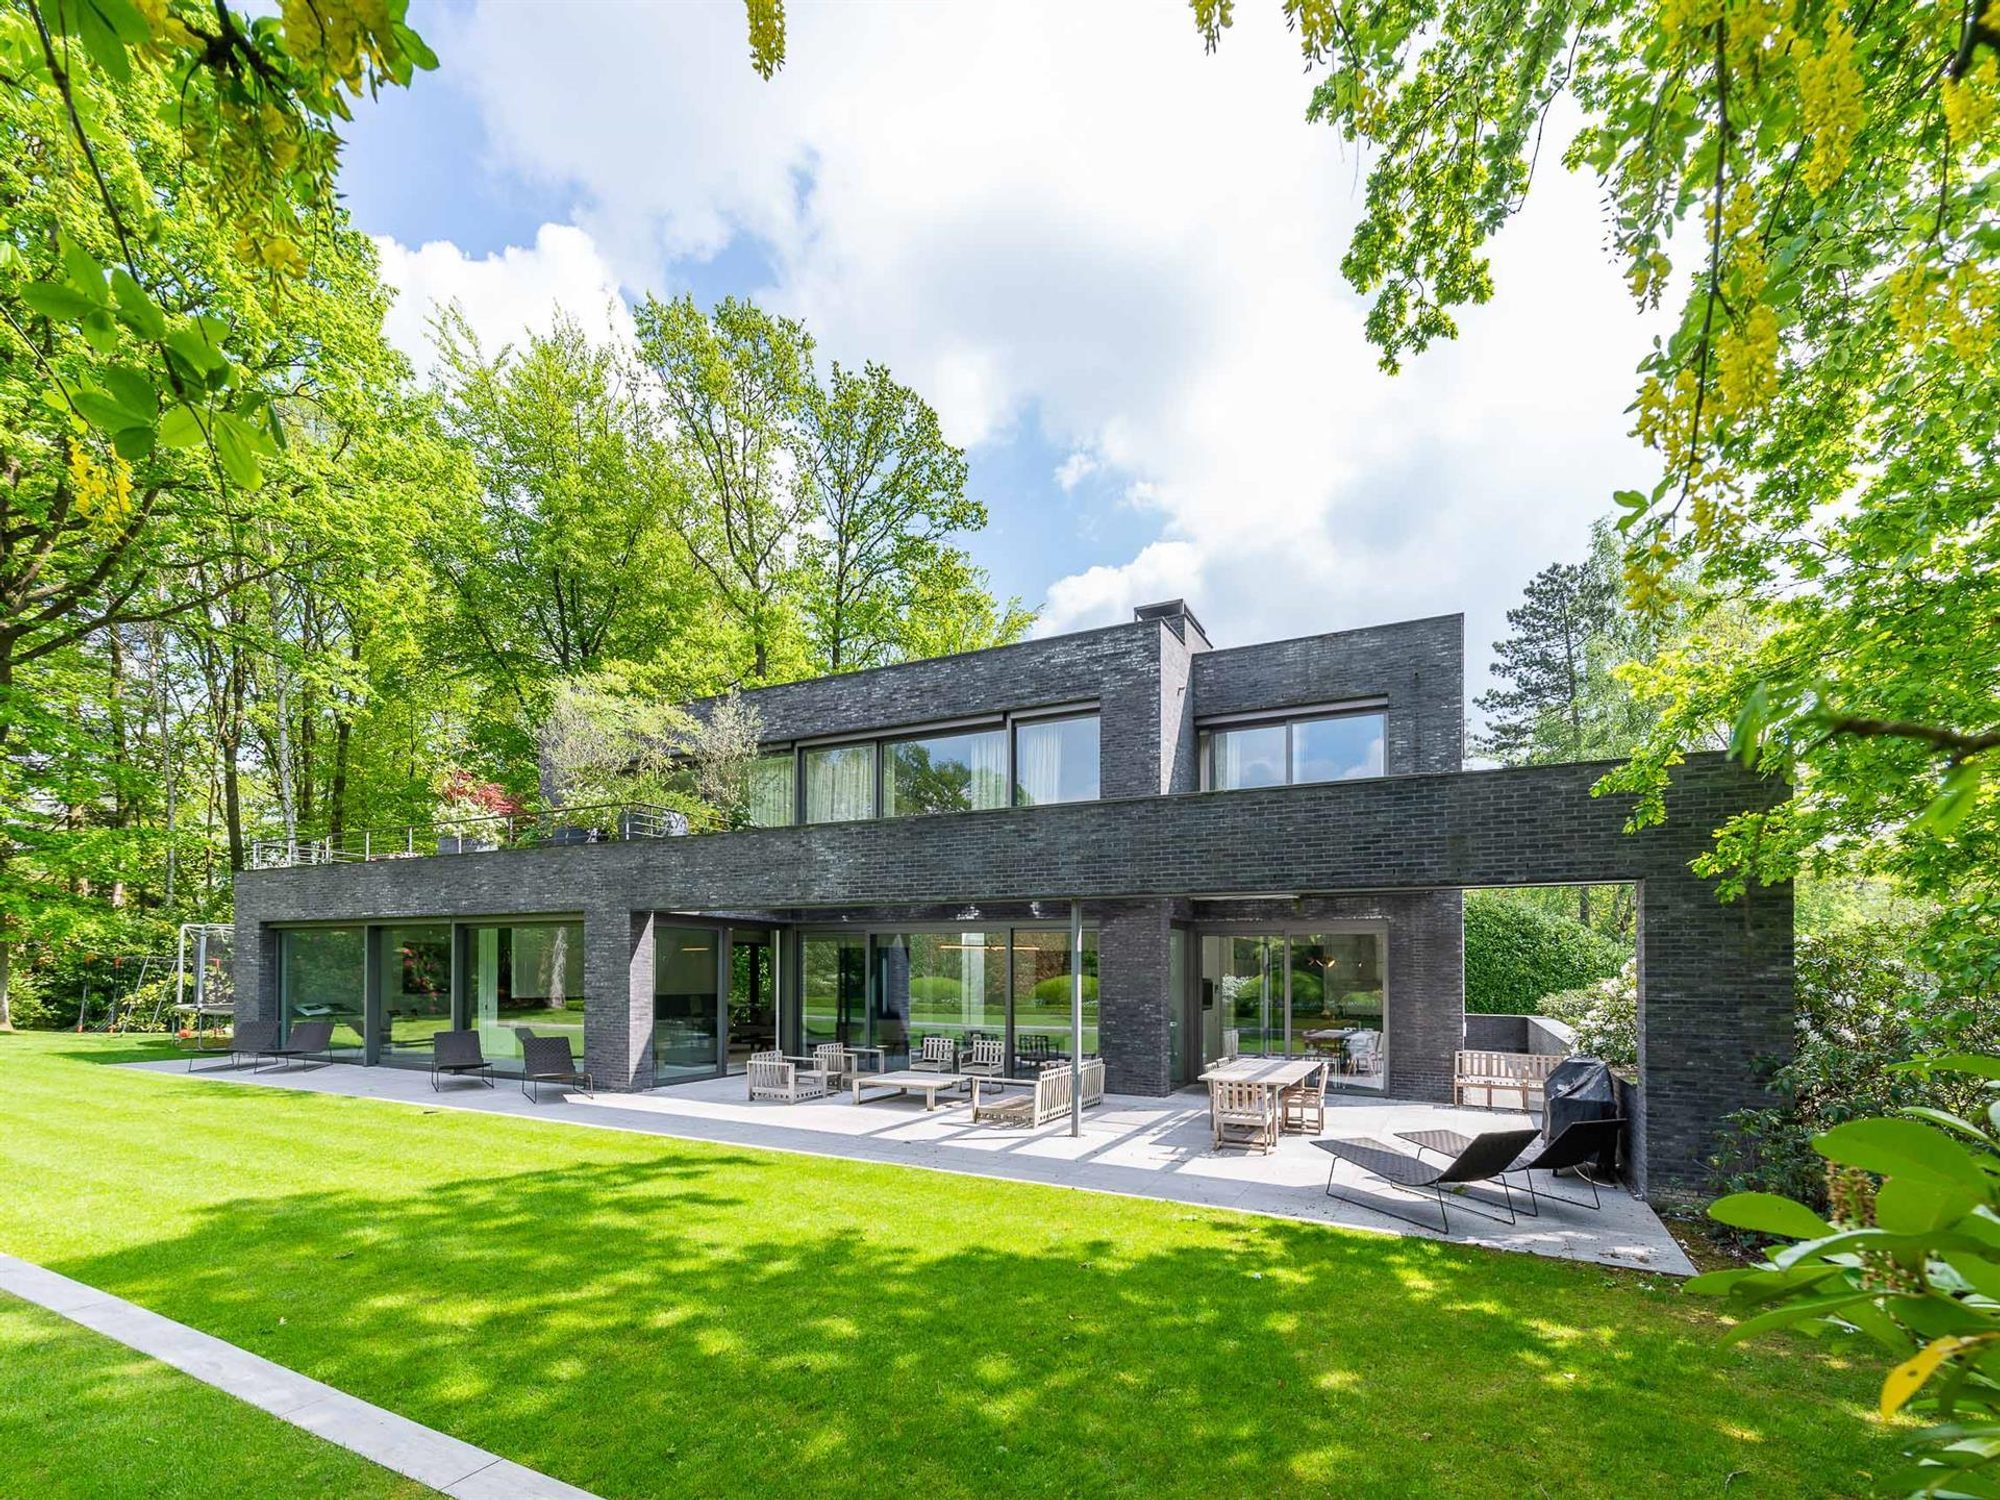 Modern home design featuring dark gray and black brick siding, floor to ceiling windows and a flat roof.